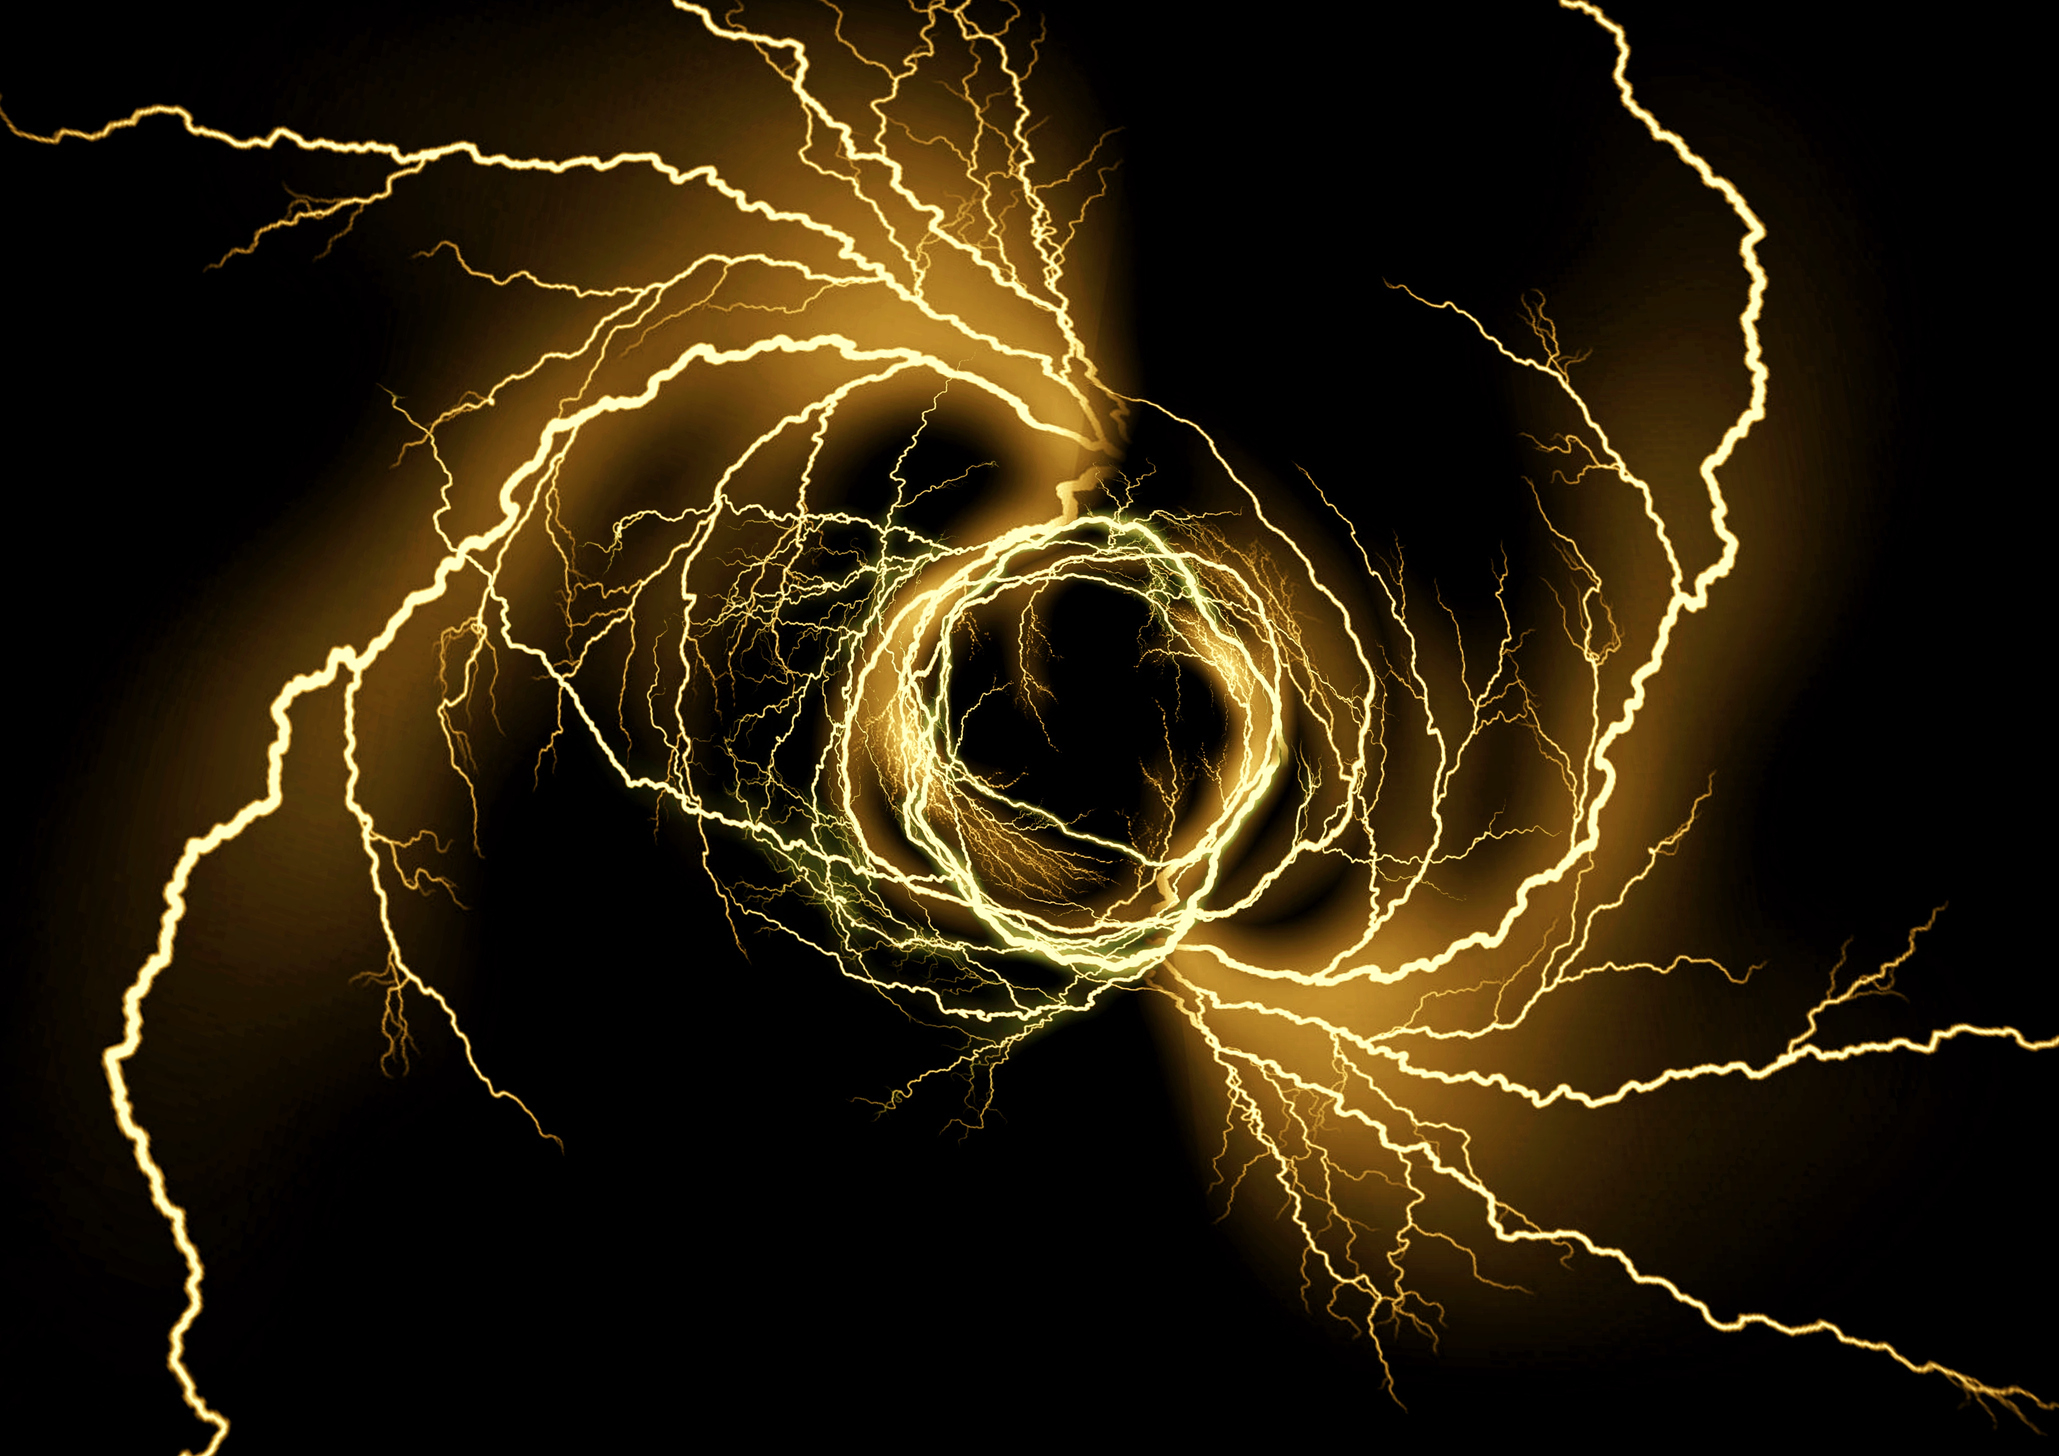 Abstract image of lightning-like patterns creating a swirling vortex design